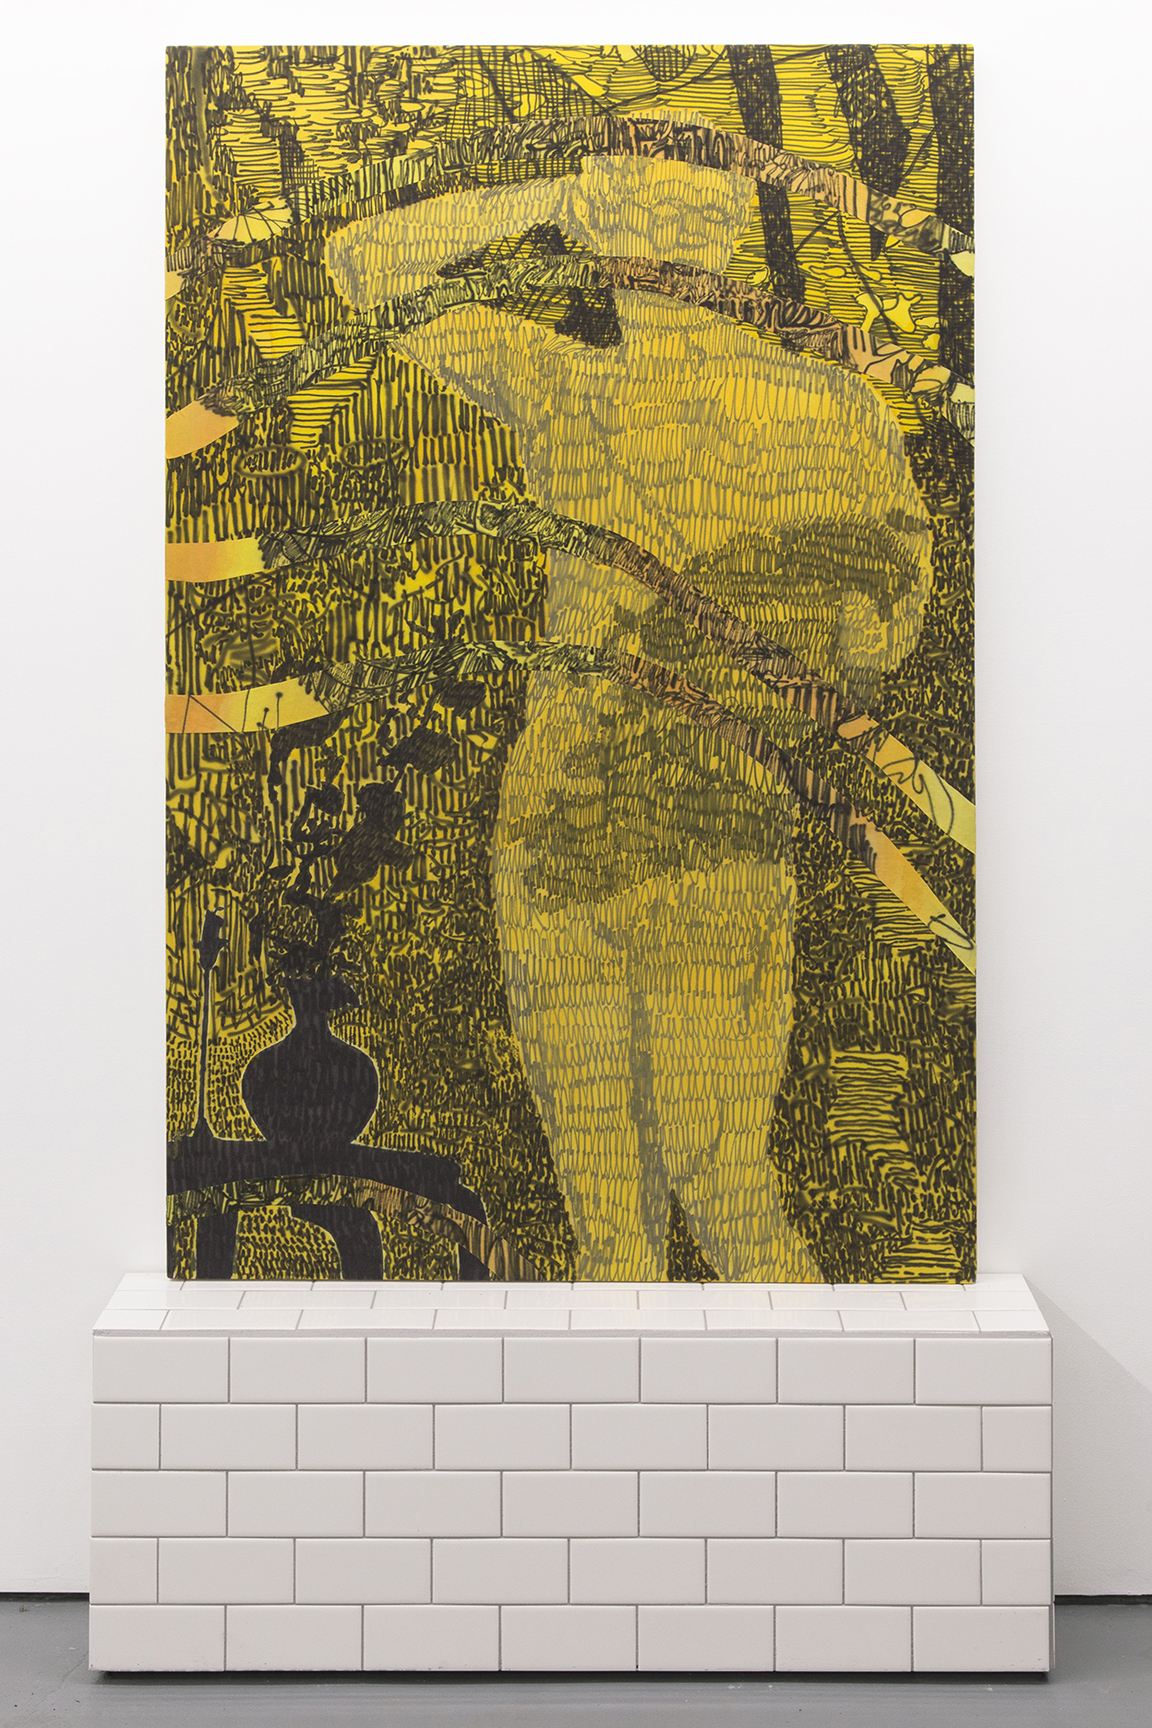 Himself being here, 2015, 38 x 60 inches, acrylic on cotton. Tile stand, wood and ceramic tiles.